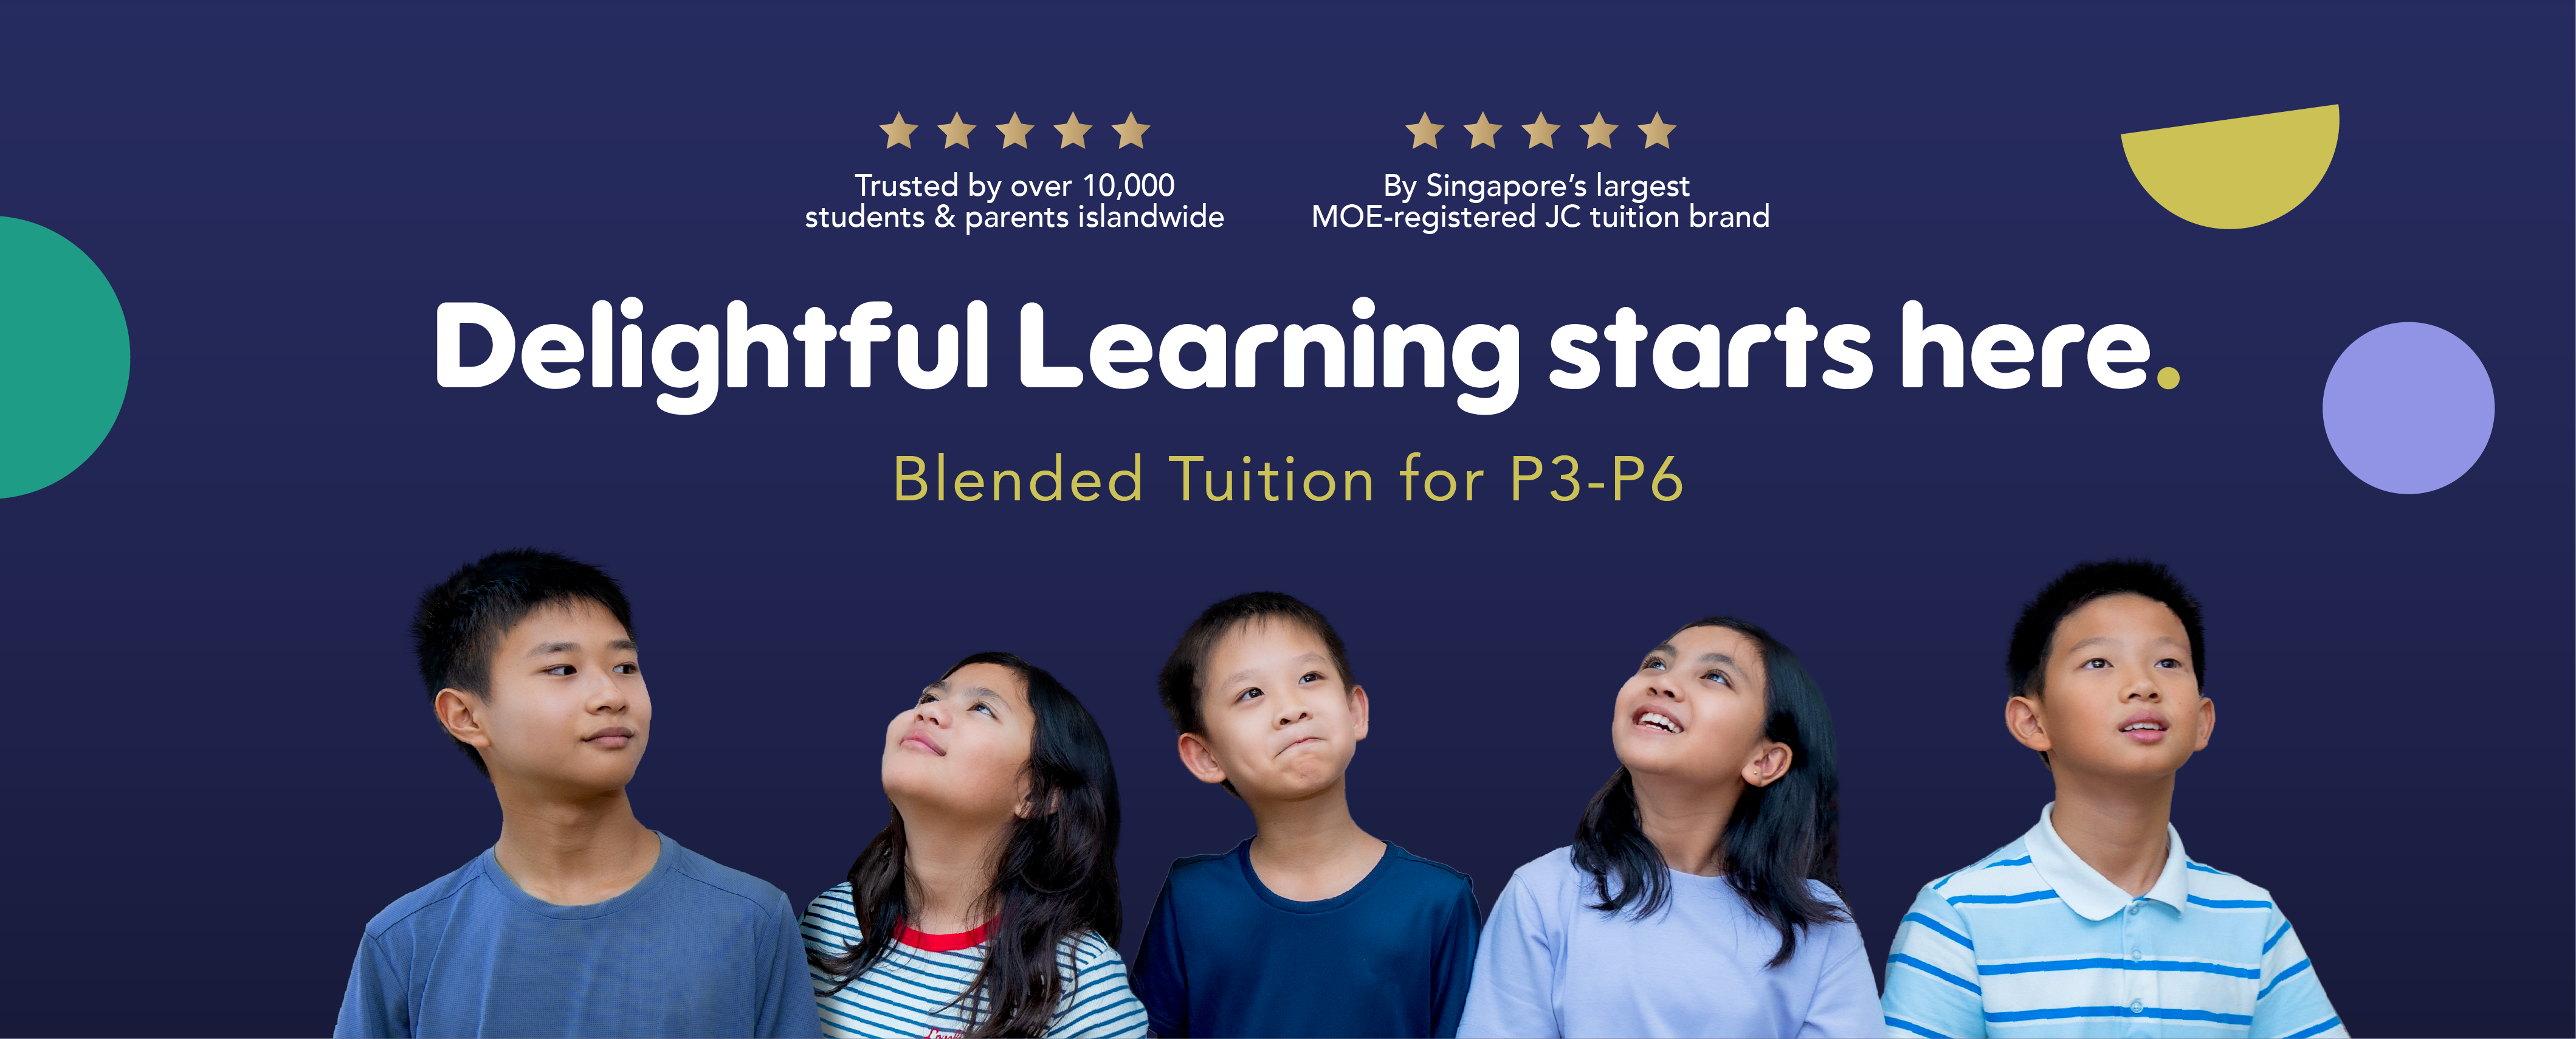 Zenith Academy Primary School Blended Tuition